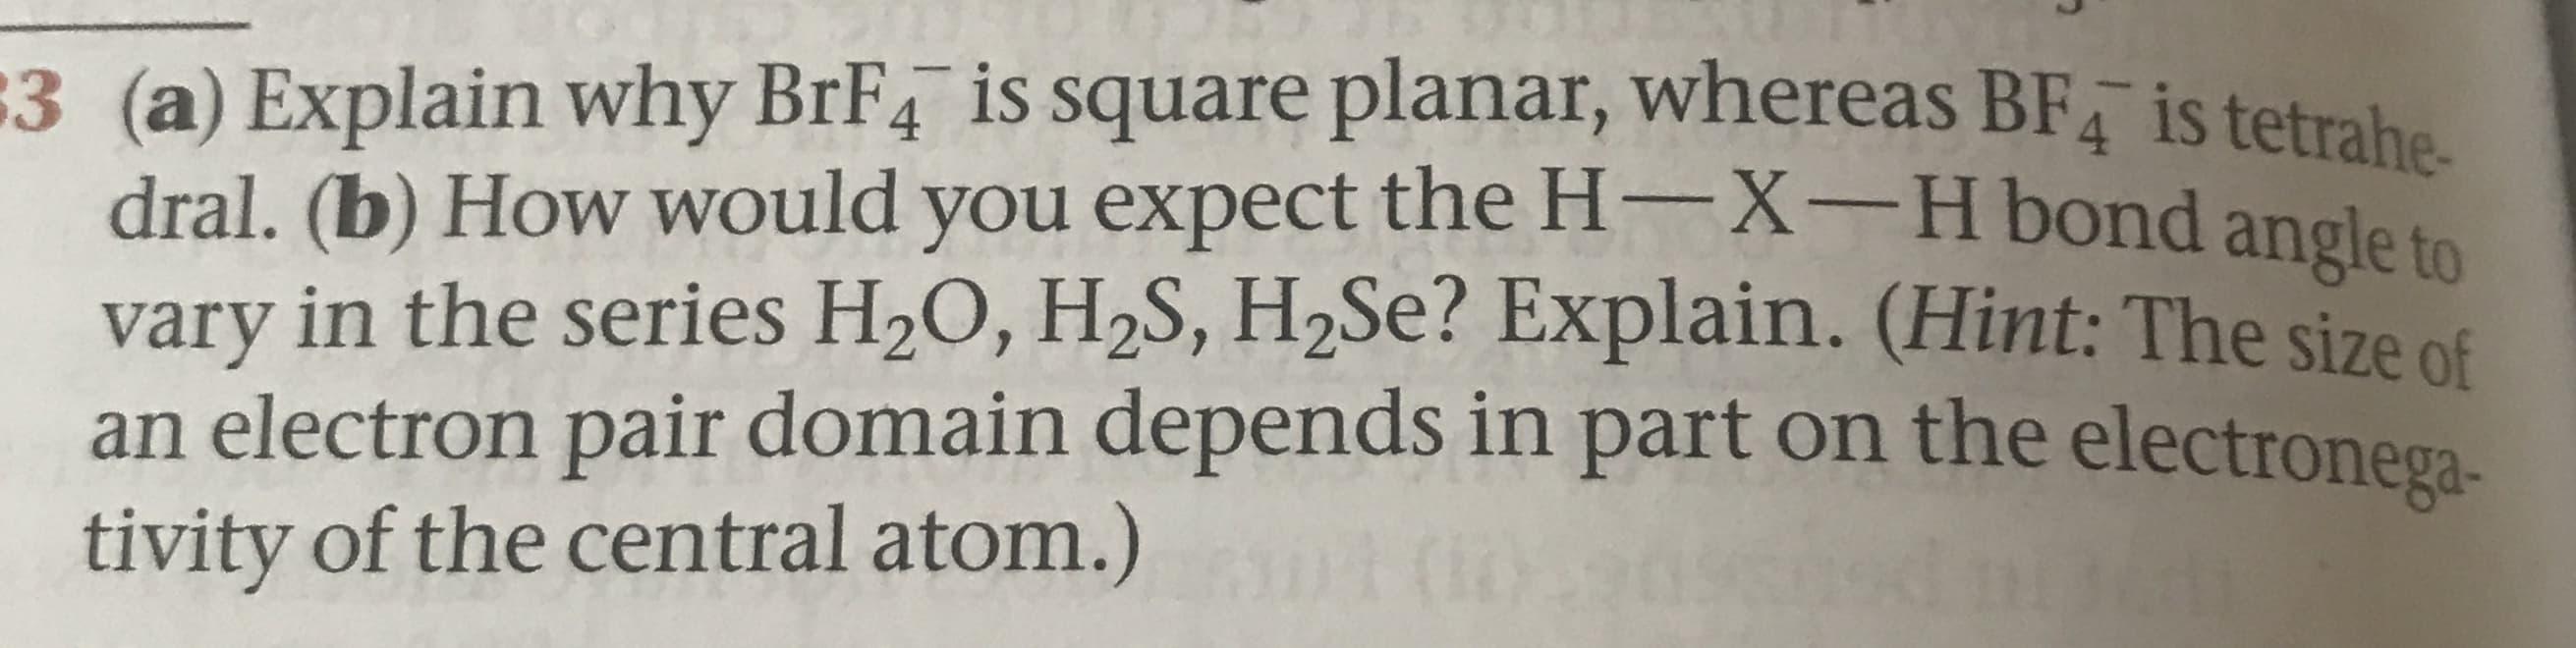 3 (a) Explain why BrF4 is square planar, whereas BF is tetrahe
dral. (b) How would you expect the H-X-H bond angle to
vary in the series H20, H2S, H2SE? Explain. (Hint: The size of
an electron pair domain depends in part on the electronega-
tivity of the central atom.)
(30
